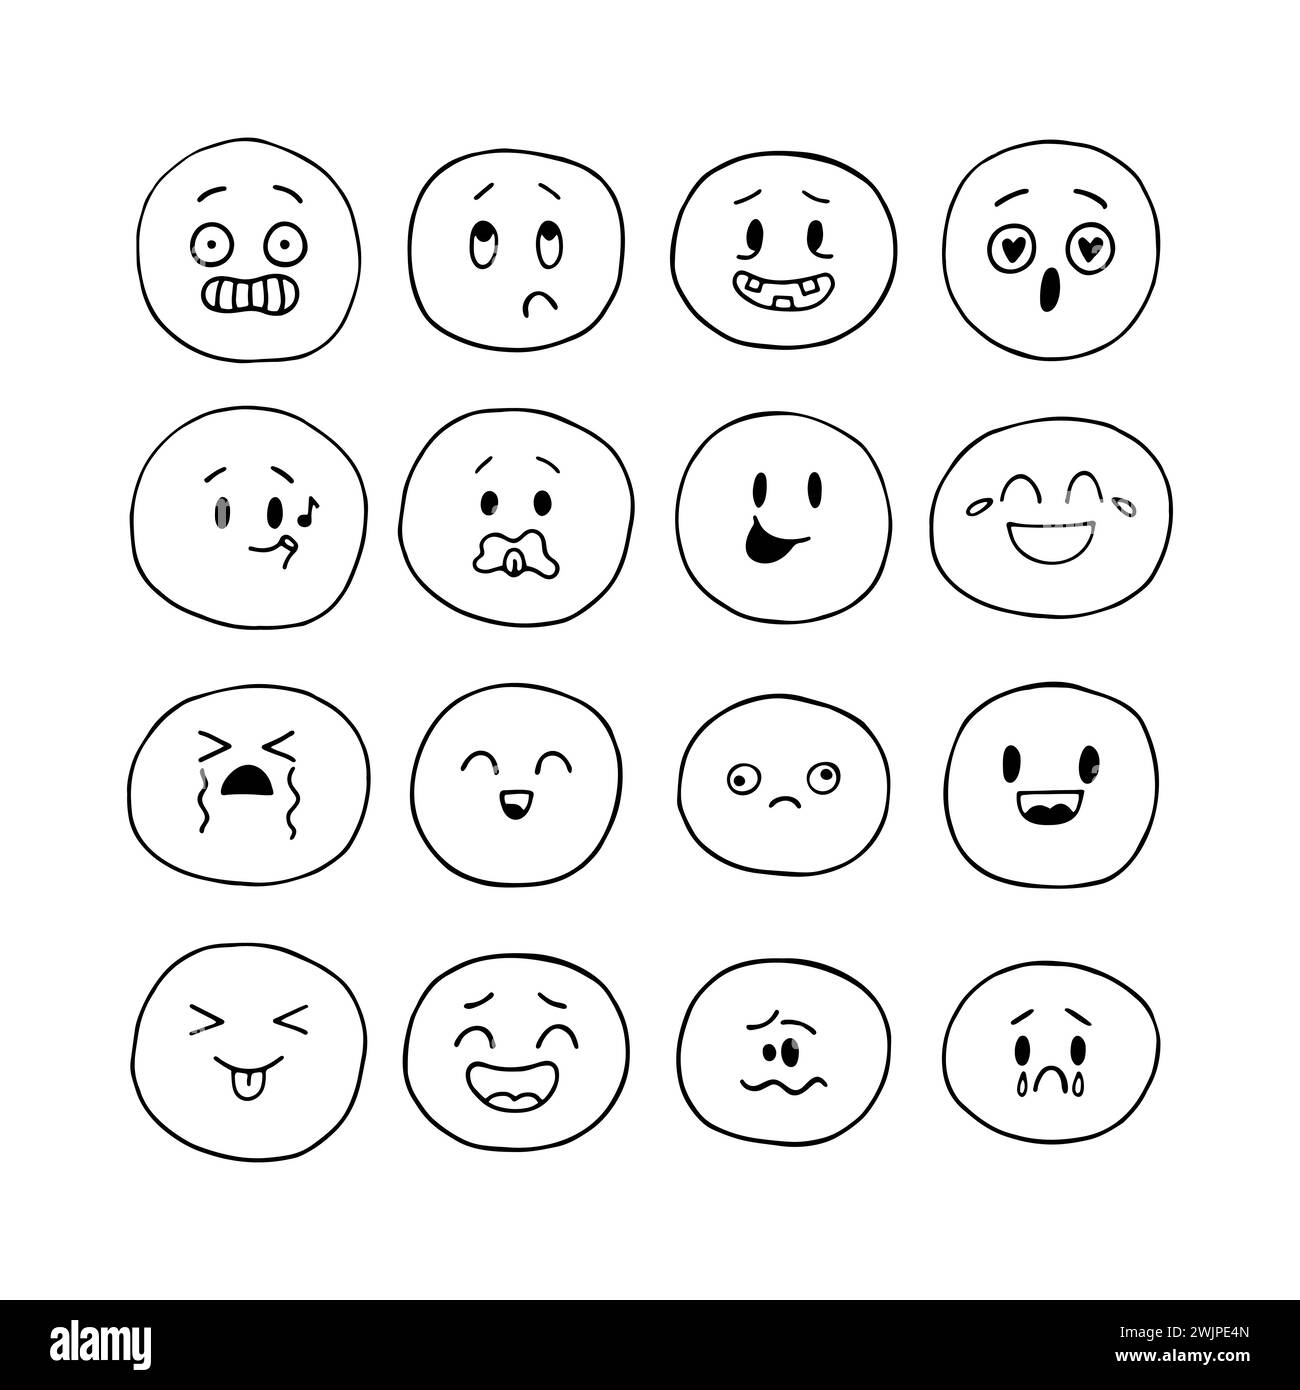 Hand drawn funny smiley faces. Emoji icons. Sketched facial expressions set. Kawaii style. Collection of cartoon emotional characters. Vector illustra Stock Vector